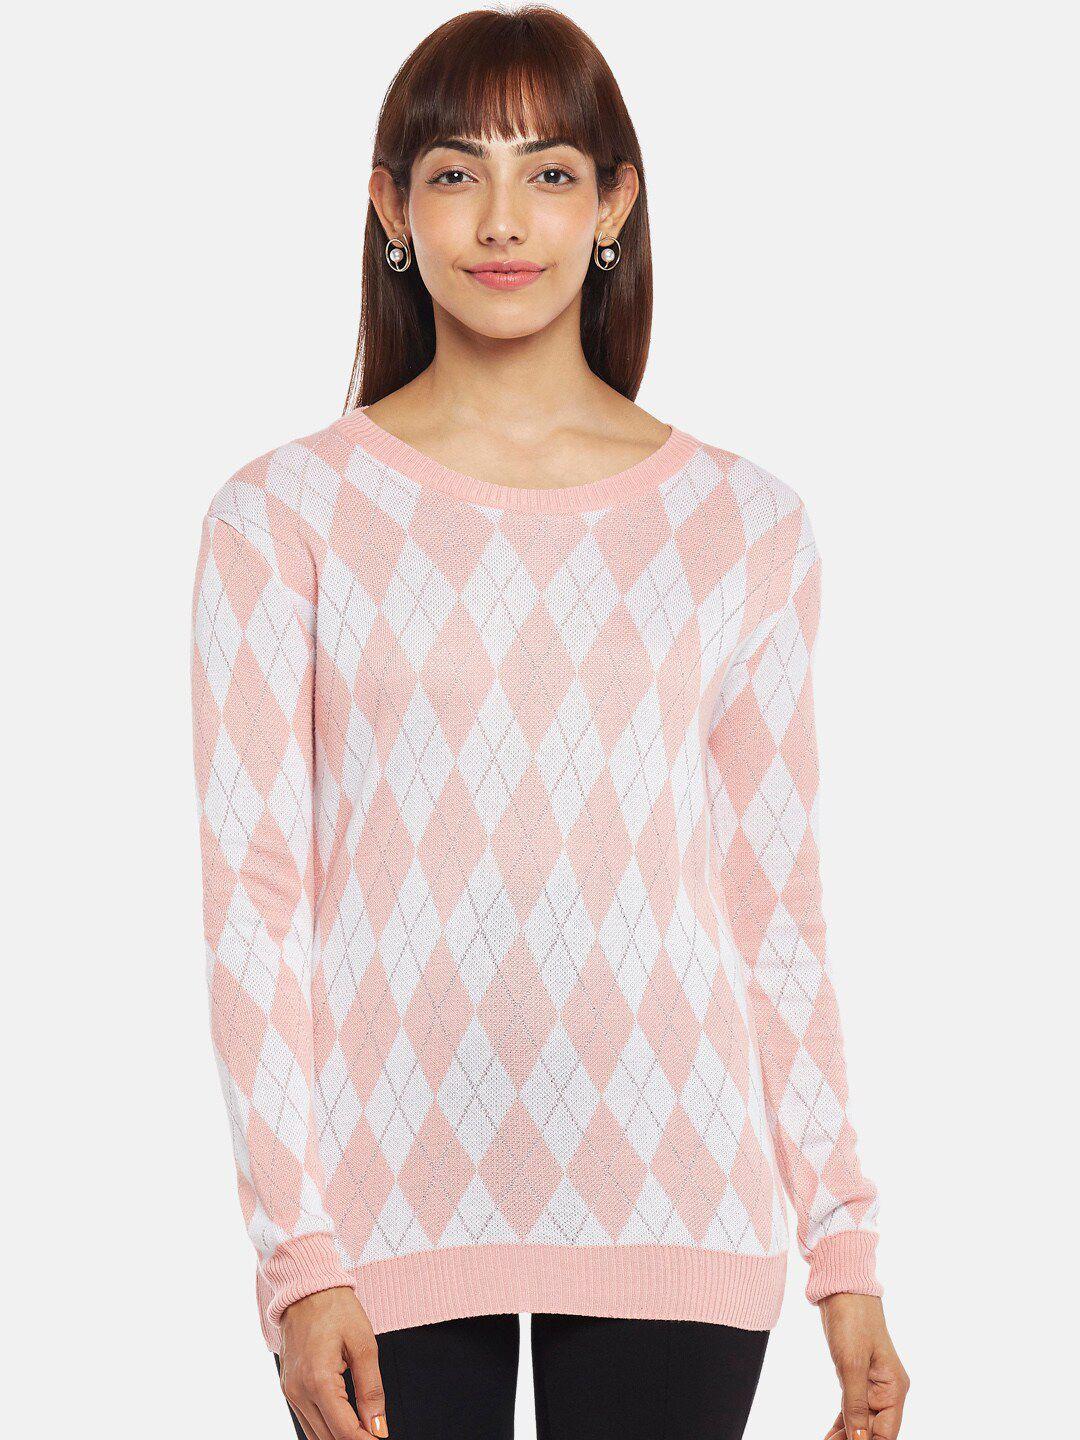 annabelle by pantaloons pink geometric print top